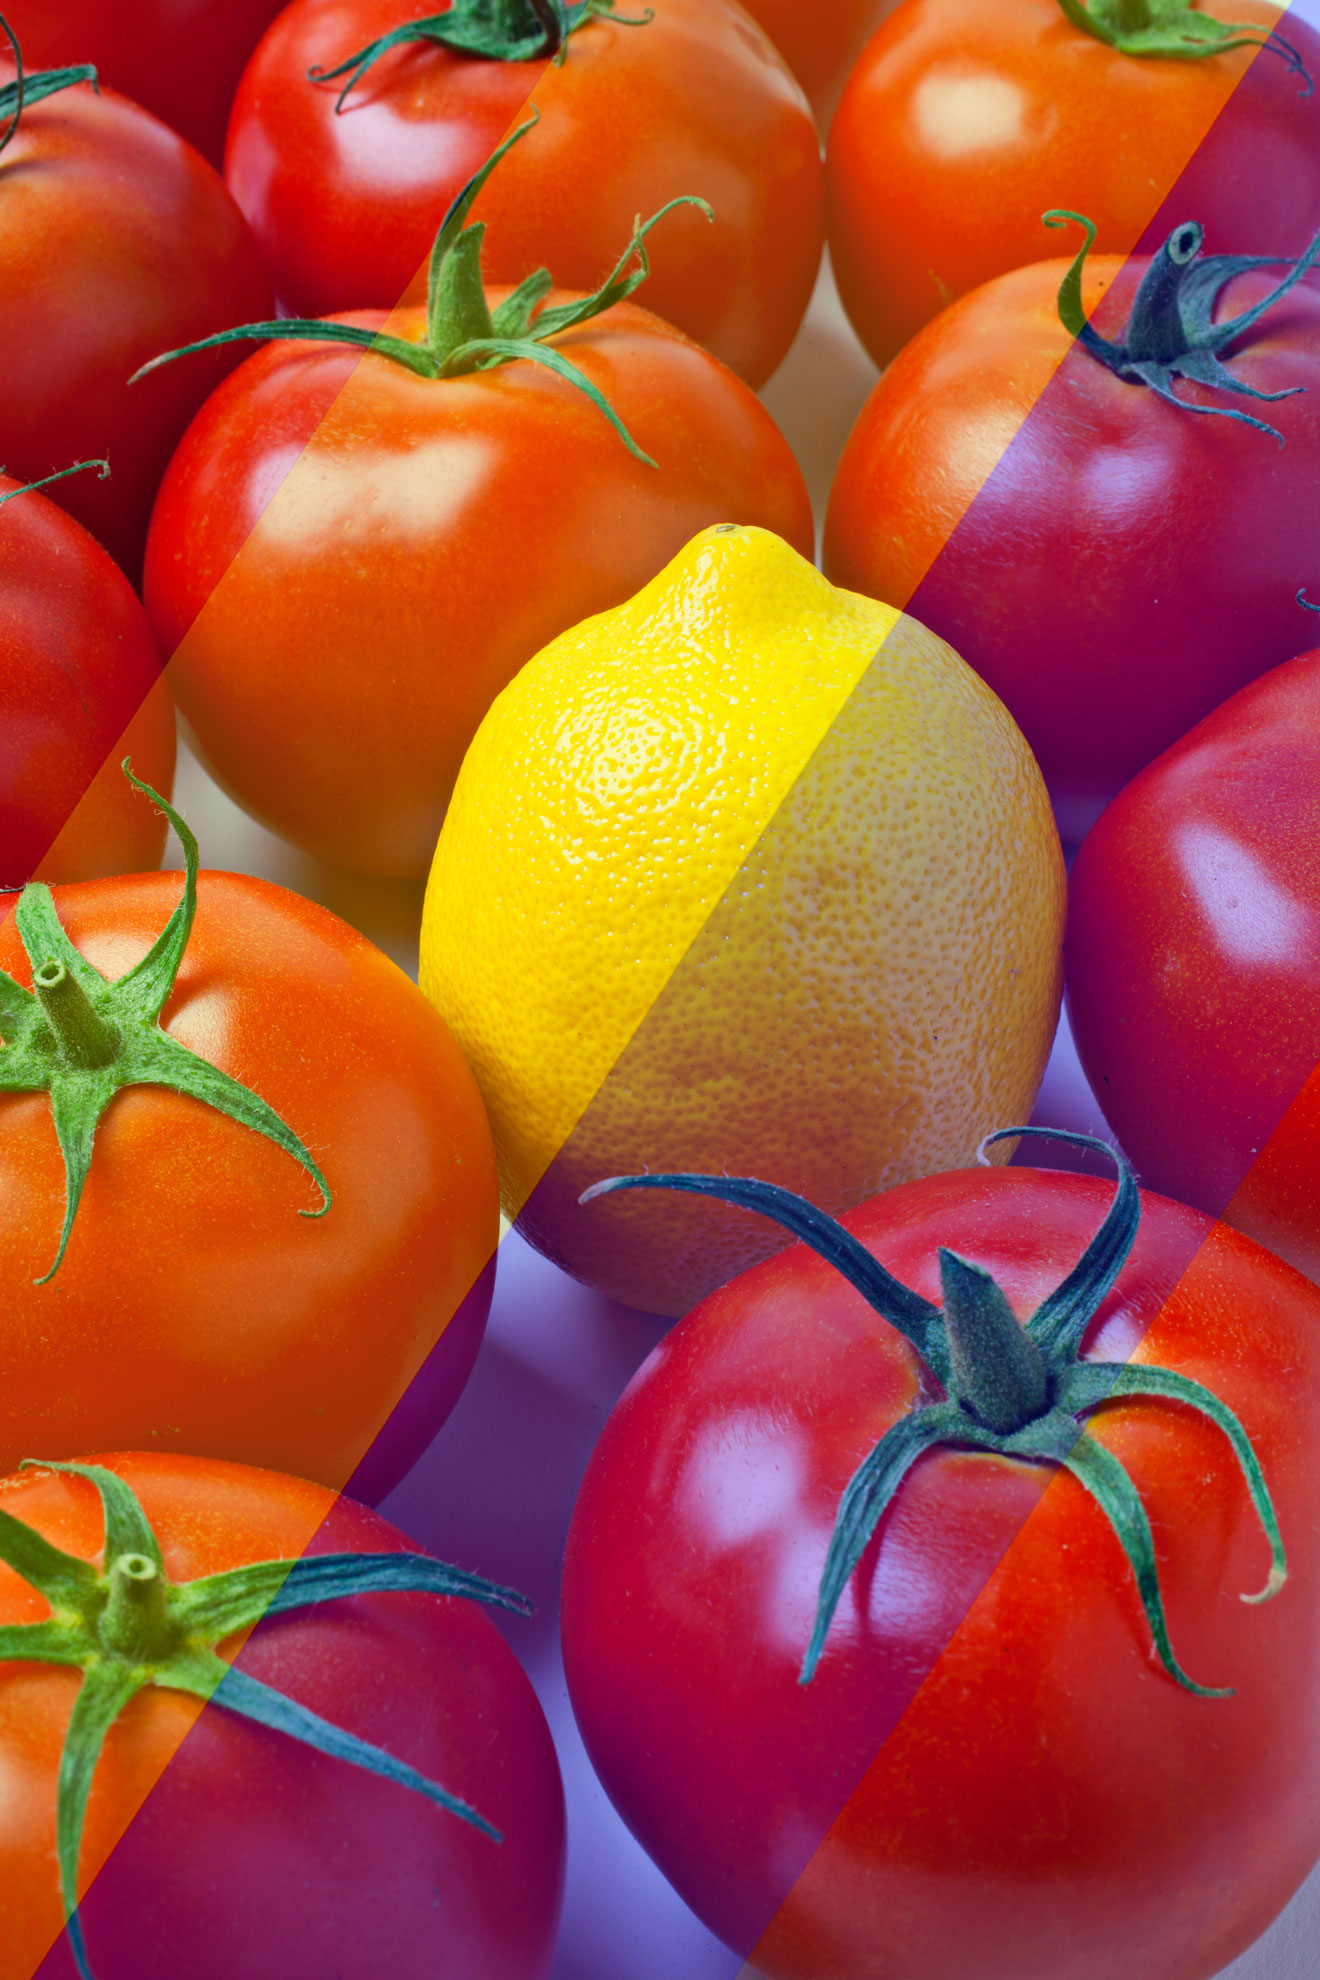 Red tomatoes with a yellow lemon in the middle.  Transparent yellow and blue bands of color are overlayed on the photo but the tomatoes still seem to be red and the lemon still seems to be yellow.